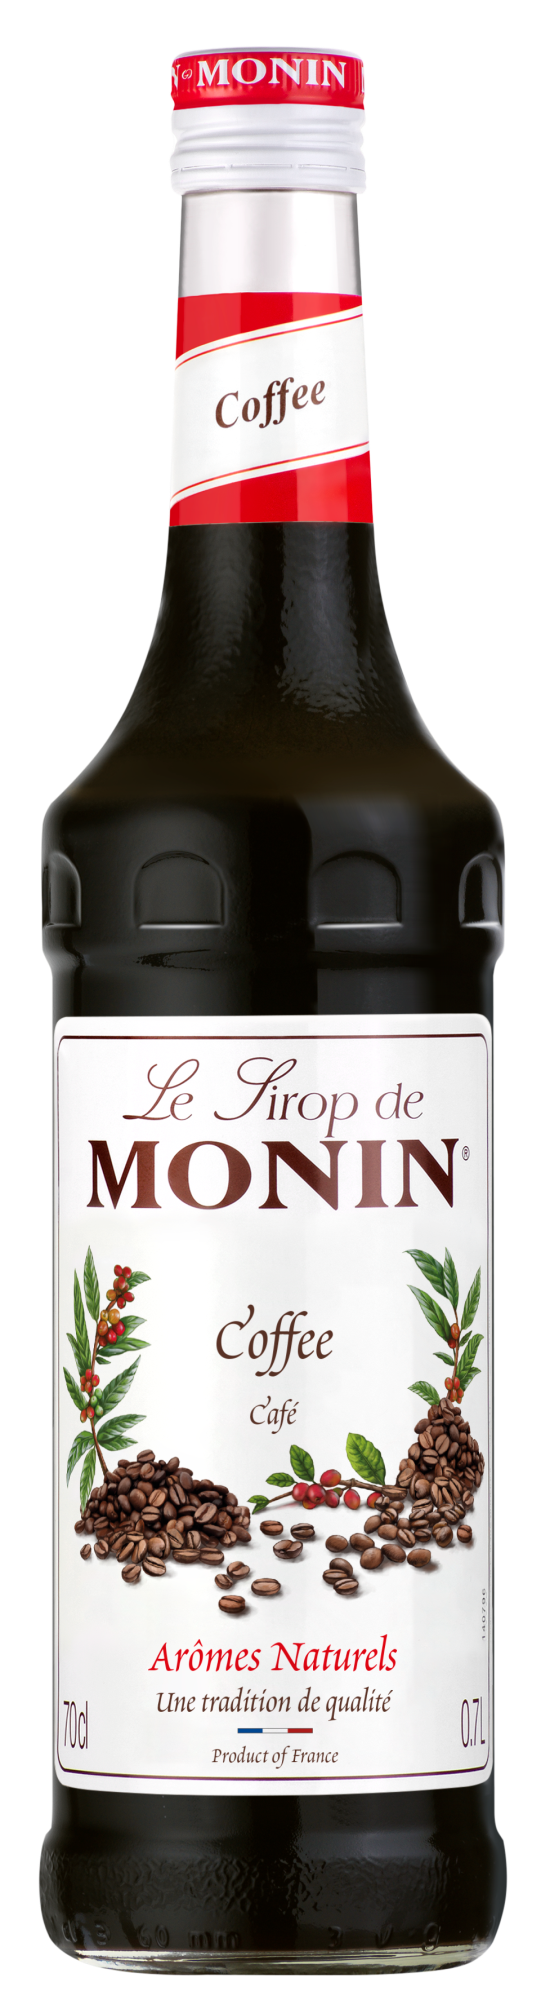 Buy MONIN Coffee syrup. The taste of brewed coffee with overtones of Colombian coffee in dessert beverages, lattes & cocktails.